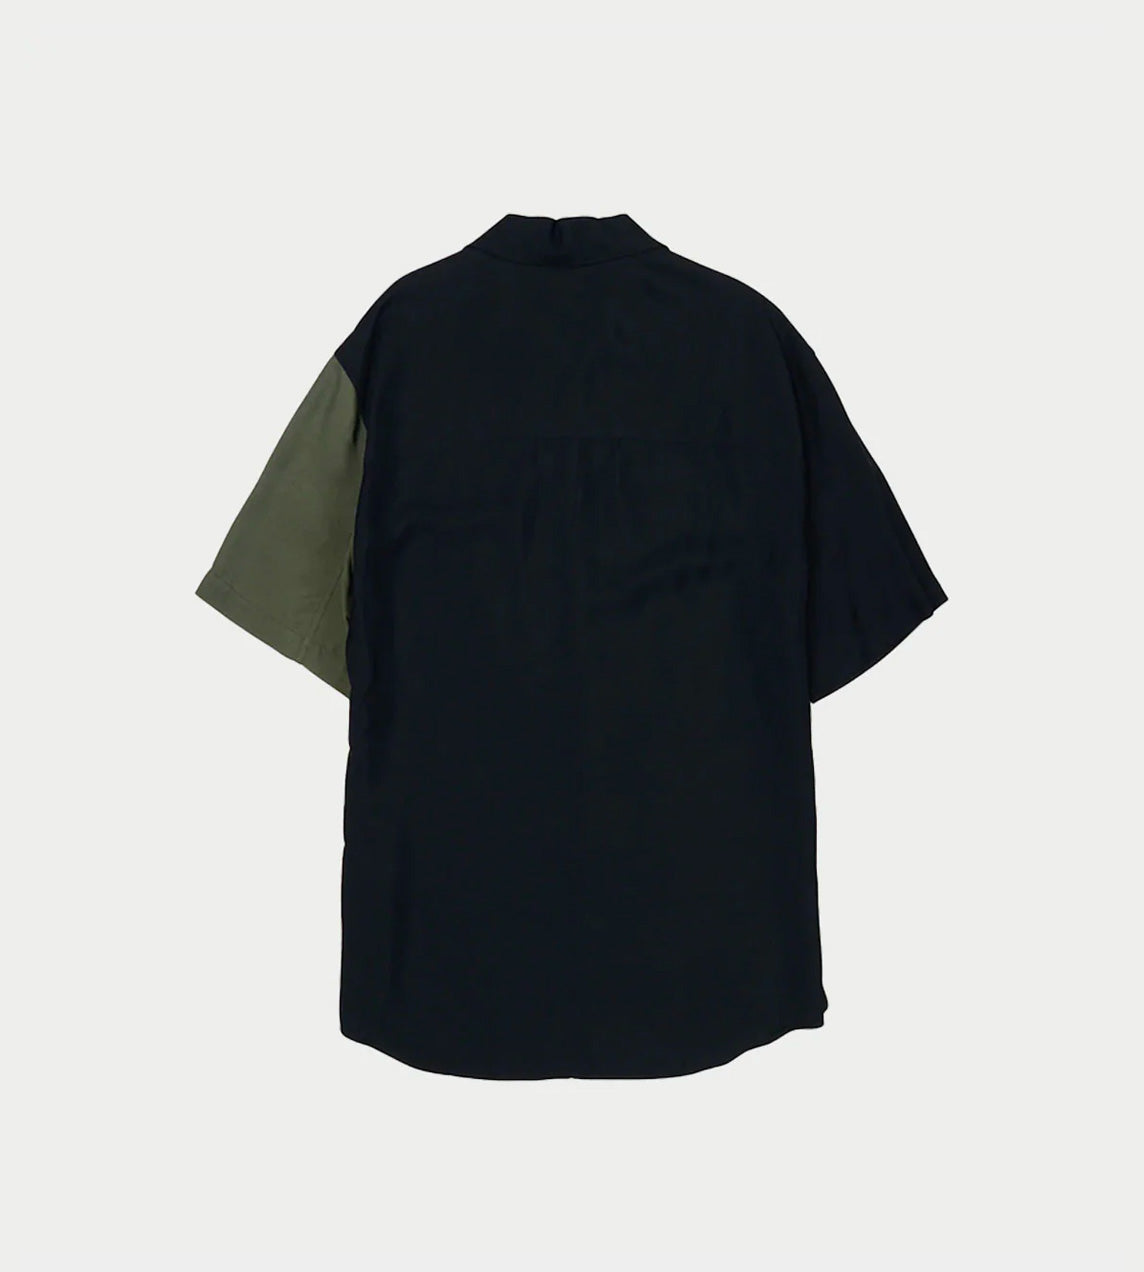 Song For The Mute - S/S Oversized Shirt Black